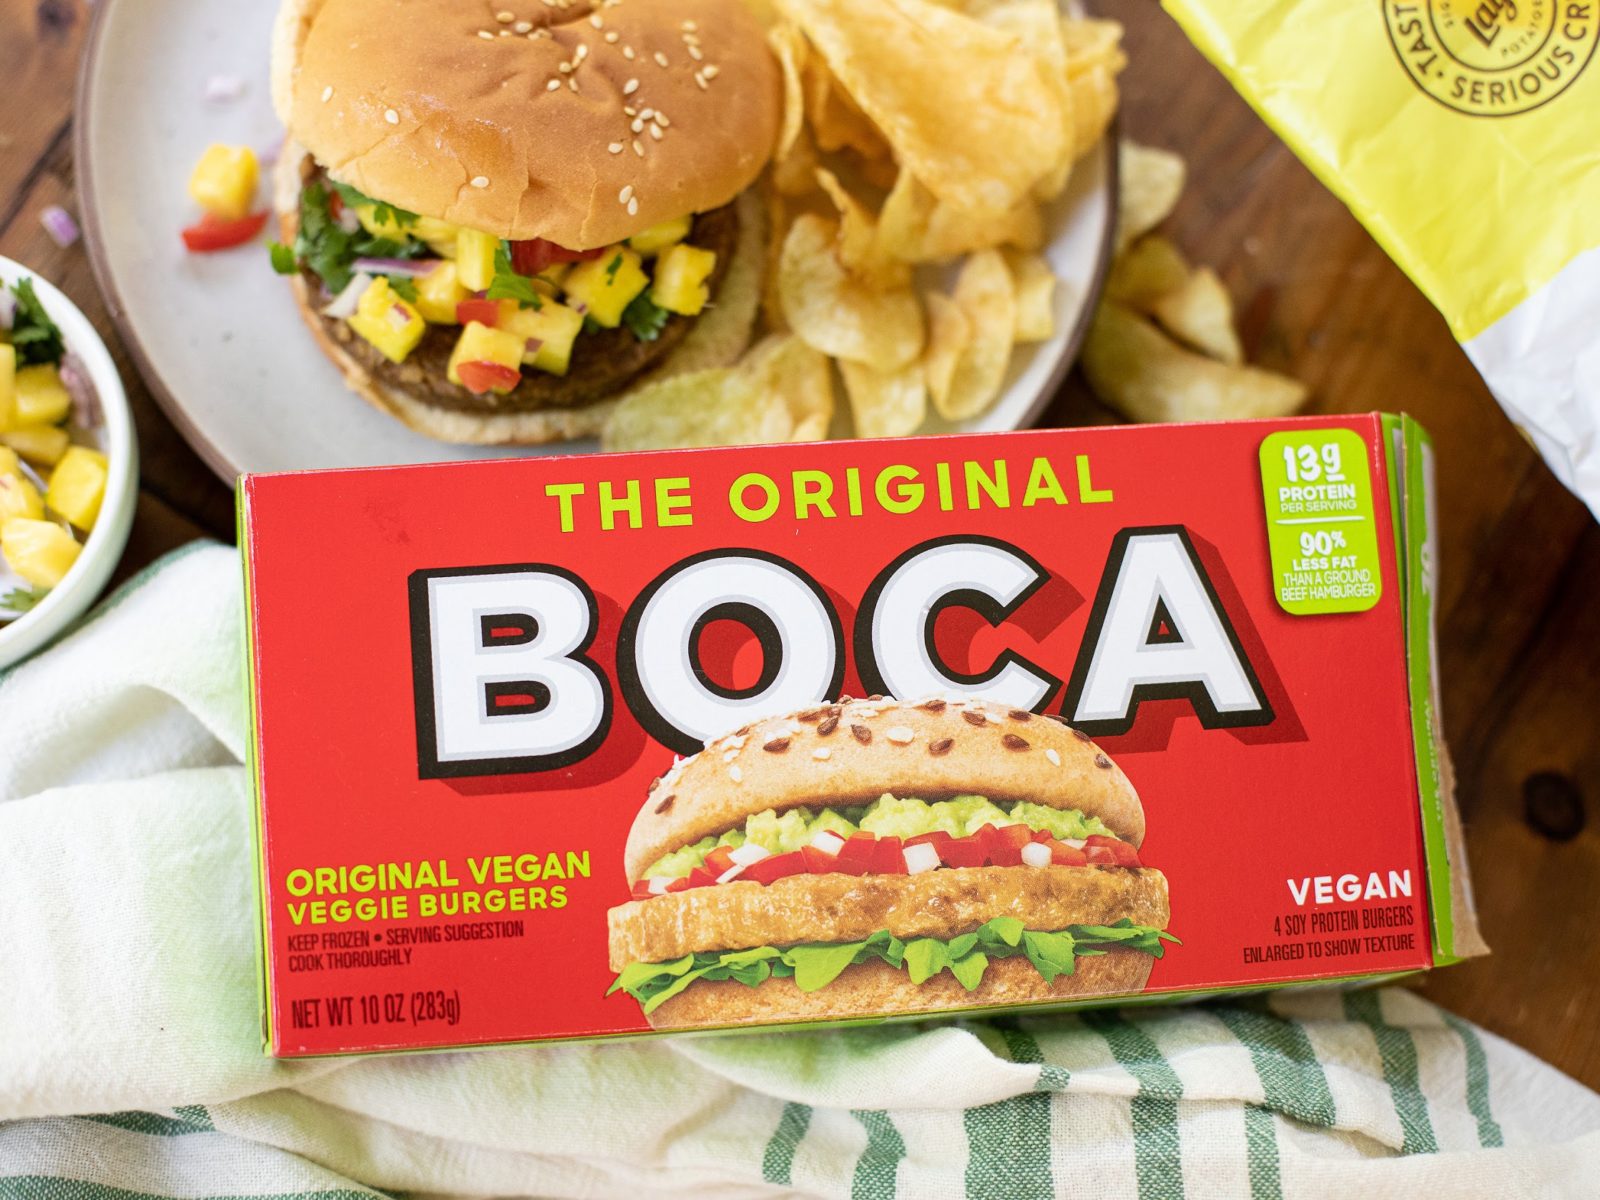 Boca Veggie Products As Low As $2.08 At Kroger